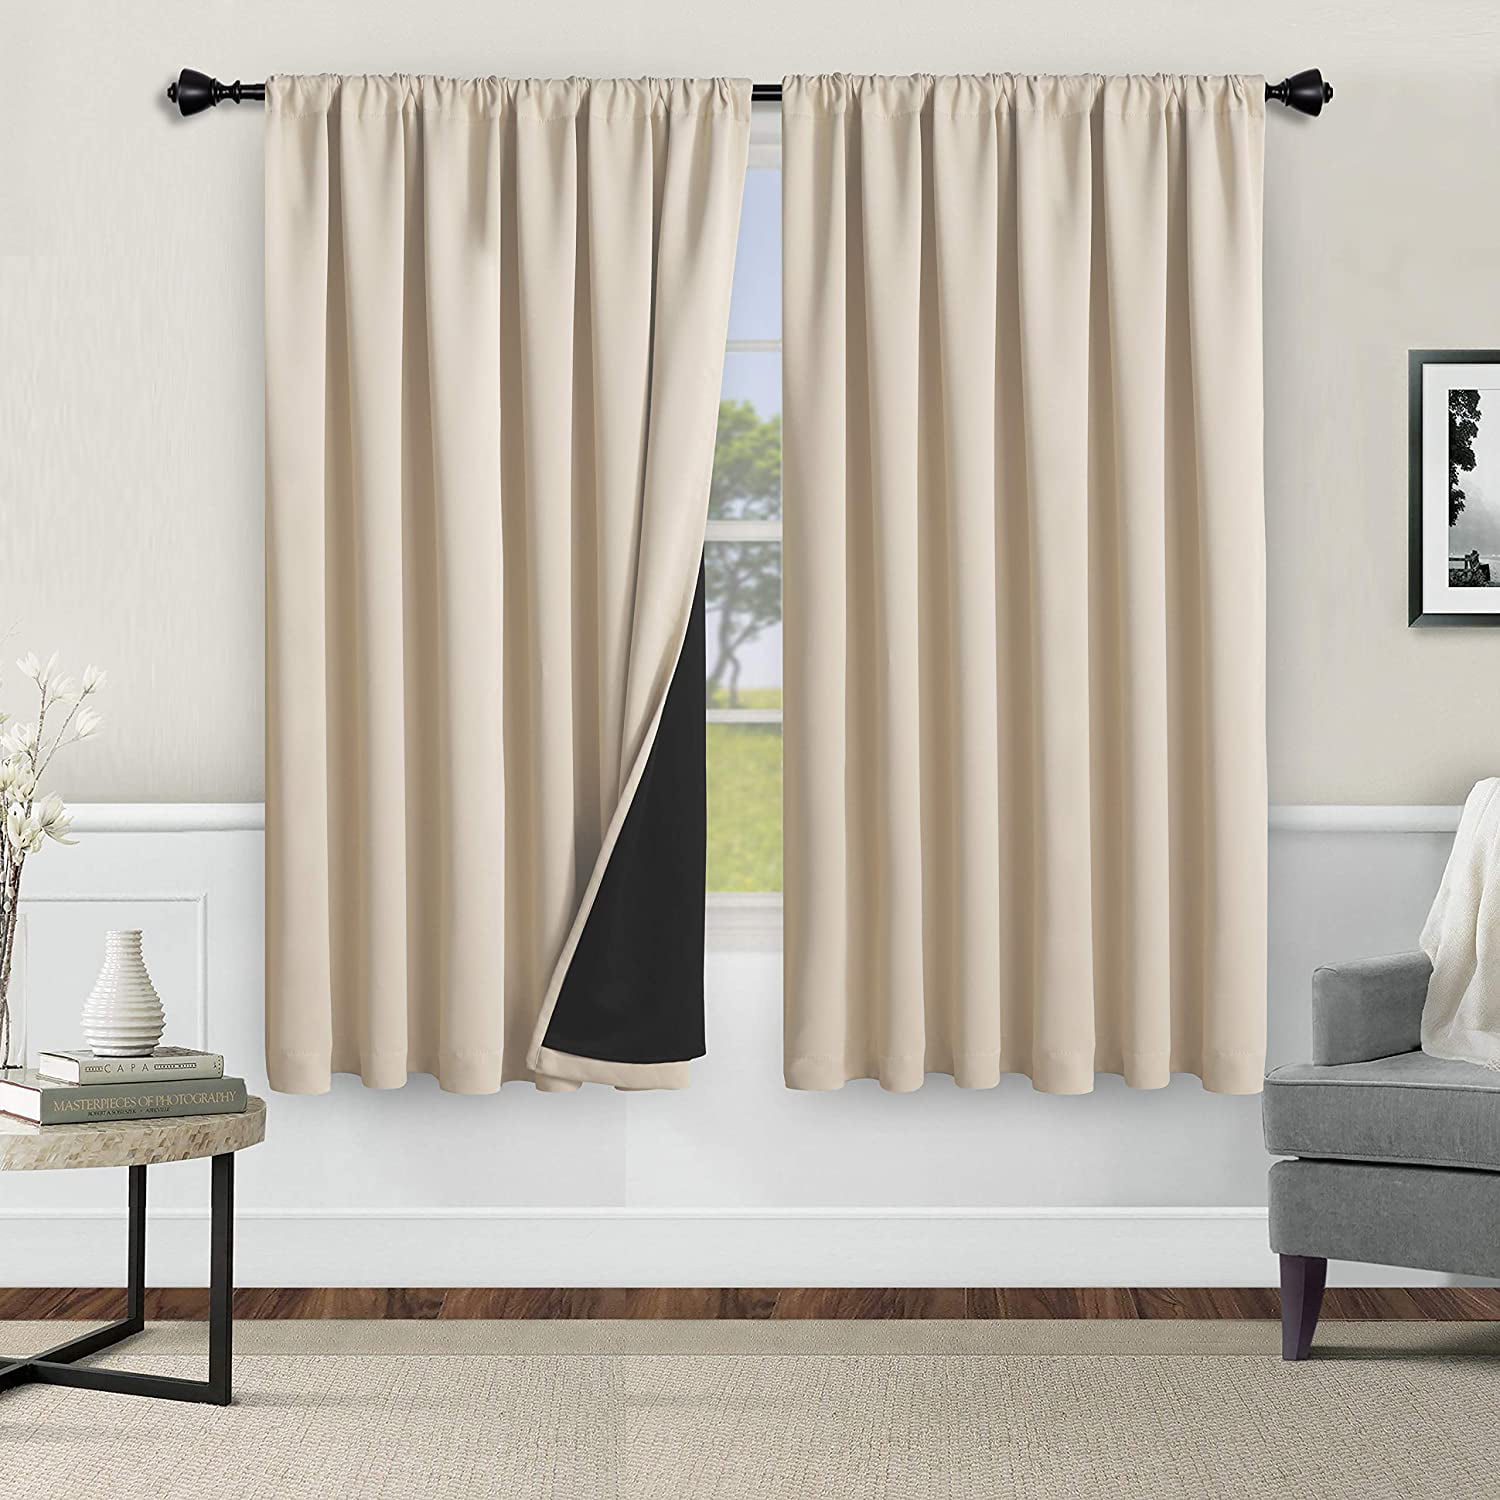 52 x 84 inch Back Tab and Rod Pocket Room Darkening Curtains for Living Room and Bedroom WONTEX Thermal Insulated Blackout Curtains Set of 2 Curtain Panels Taupe 